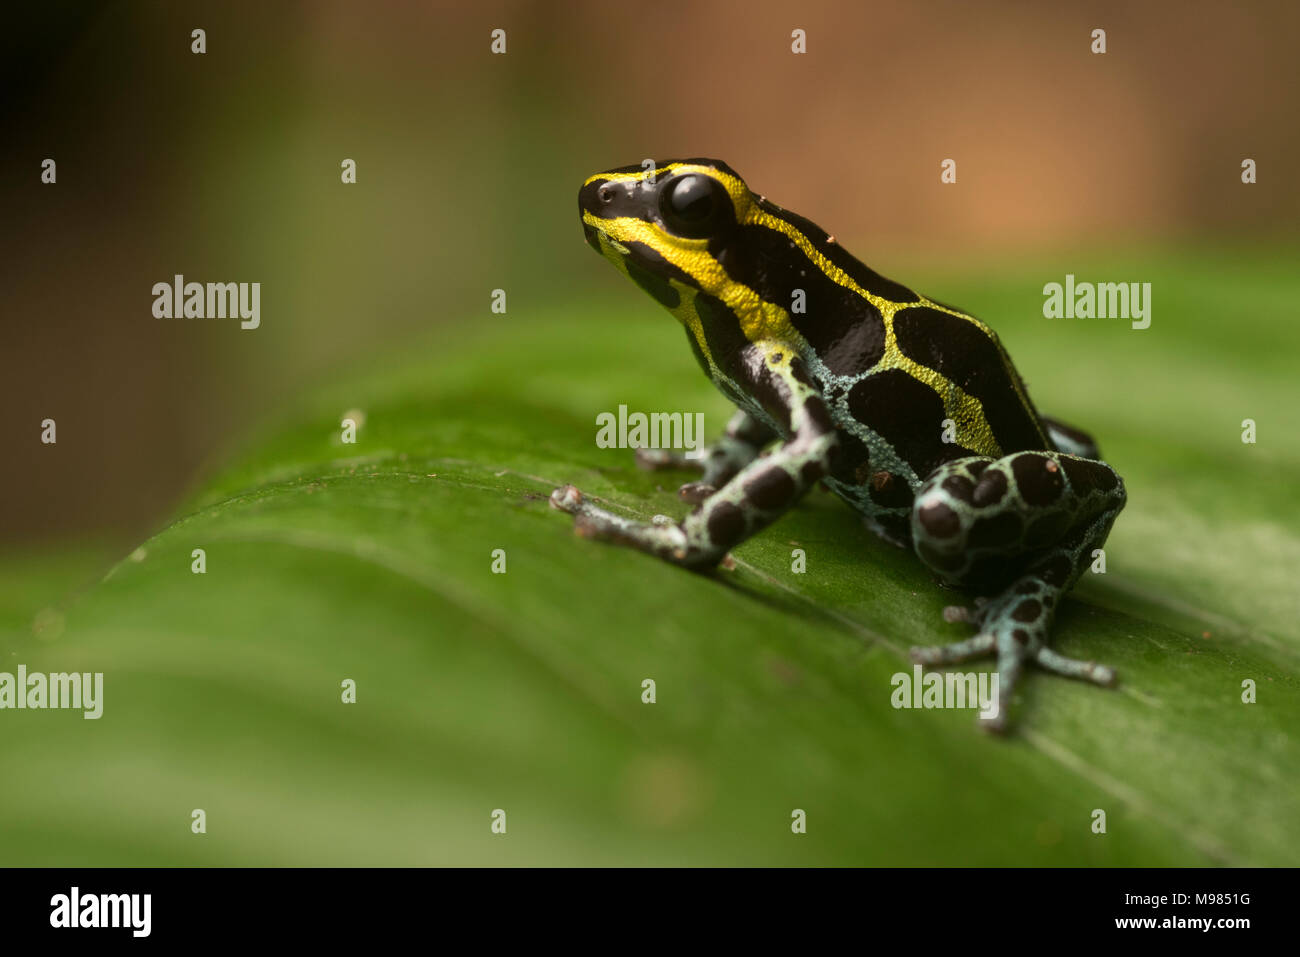 Splash back poison frog (Ranitomeya variabilis) a gorgeous species of Poison frog from the wet rainforests of Peru, Ecuador, & Colombia. Stock Photo